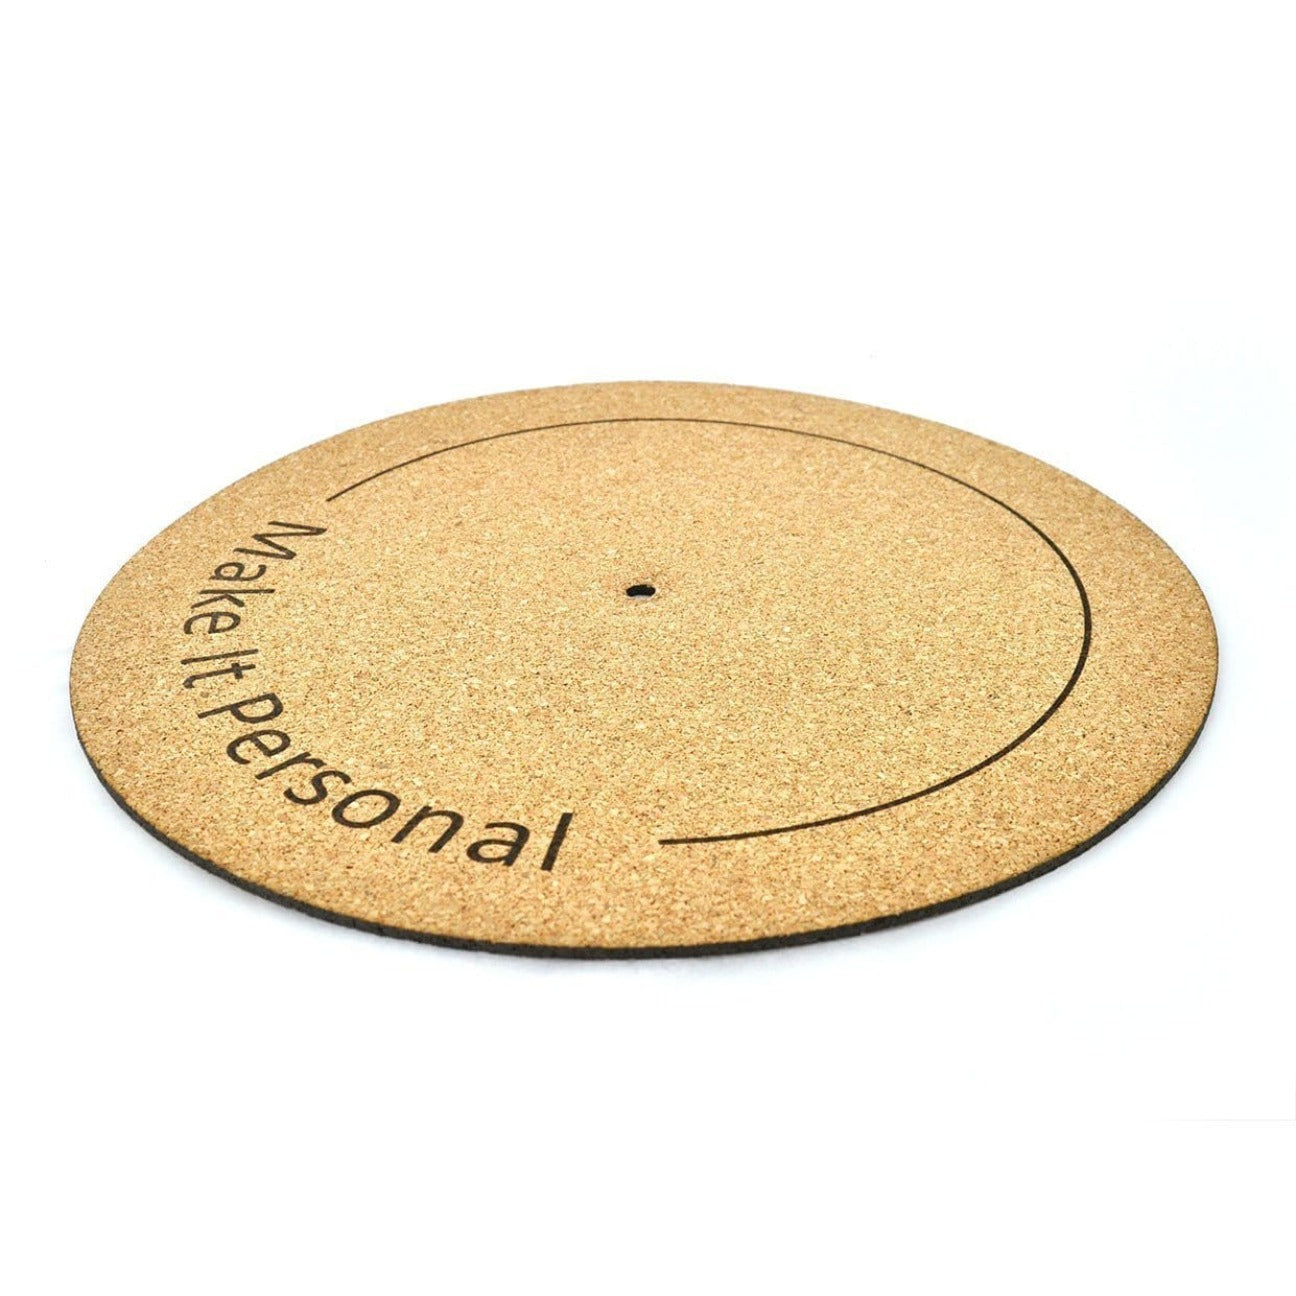 Side view of a natural cork turntable mat with a black circular line with "make it personal" written on the mat.